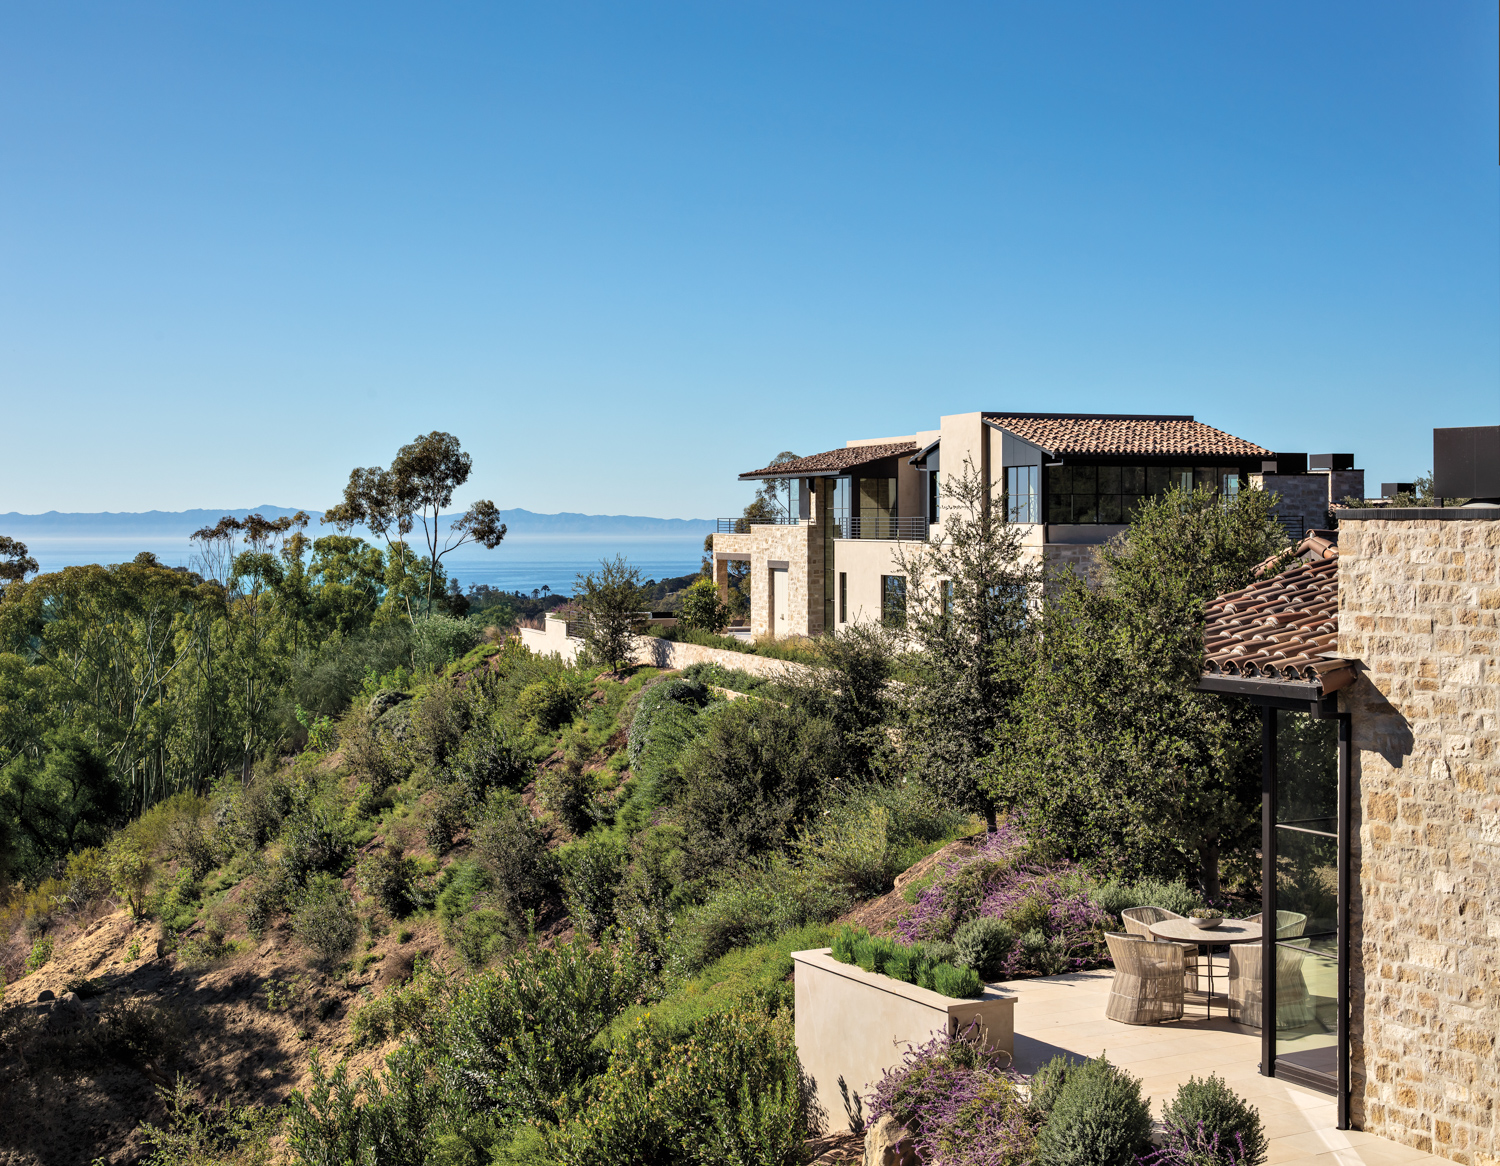 hillside old-world style home in montecito with ocean in background